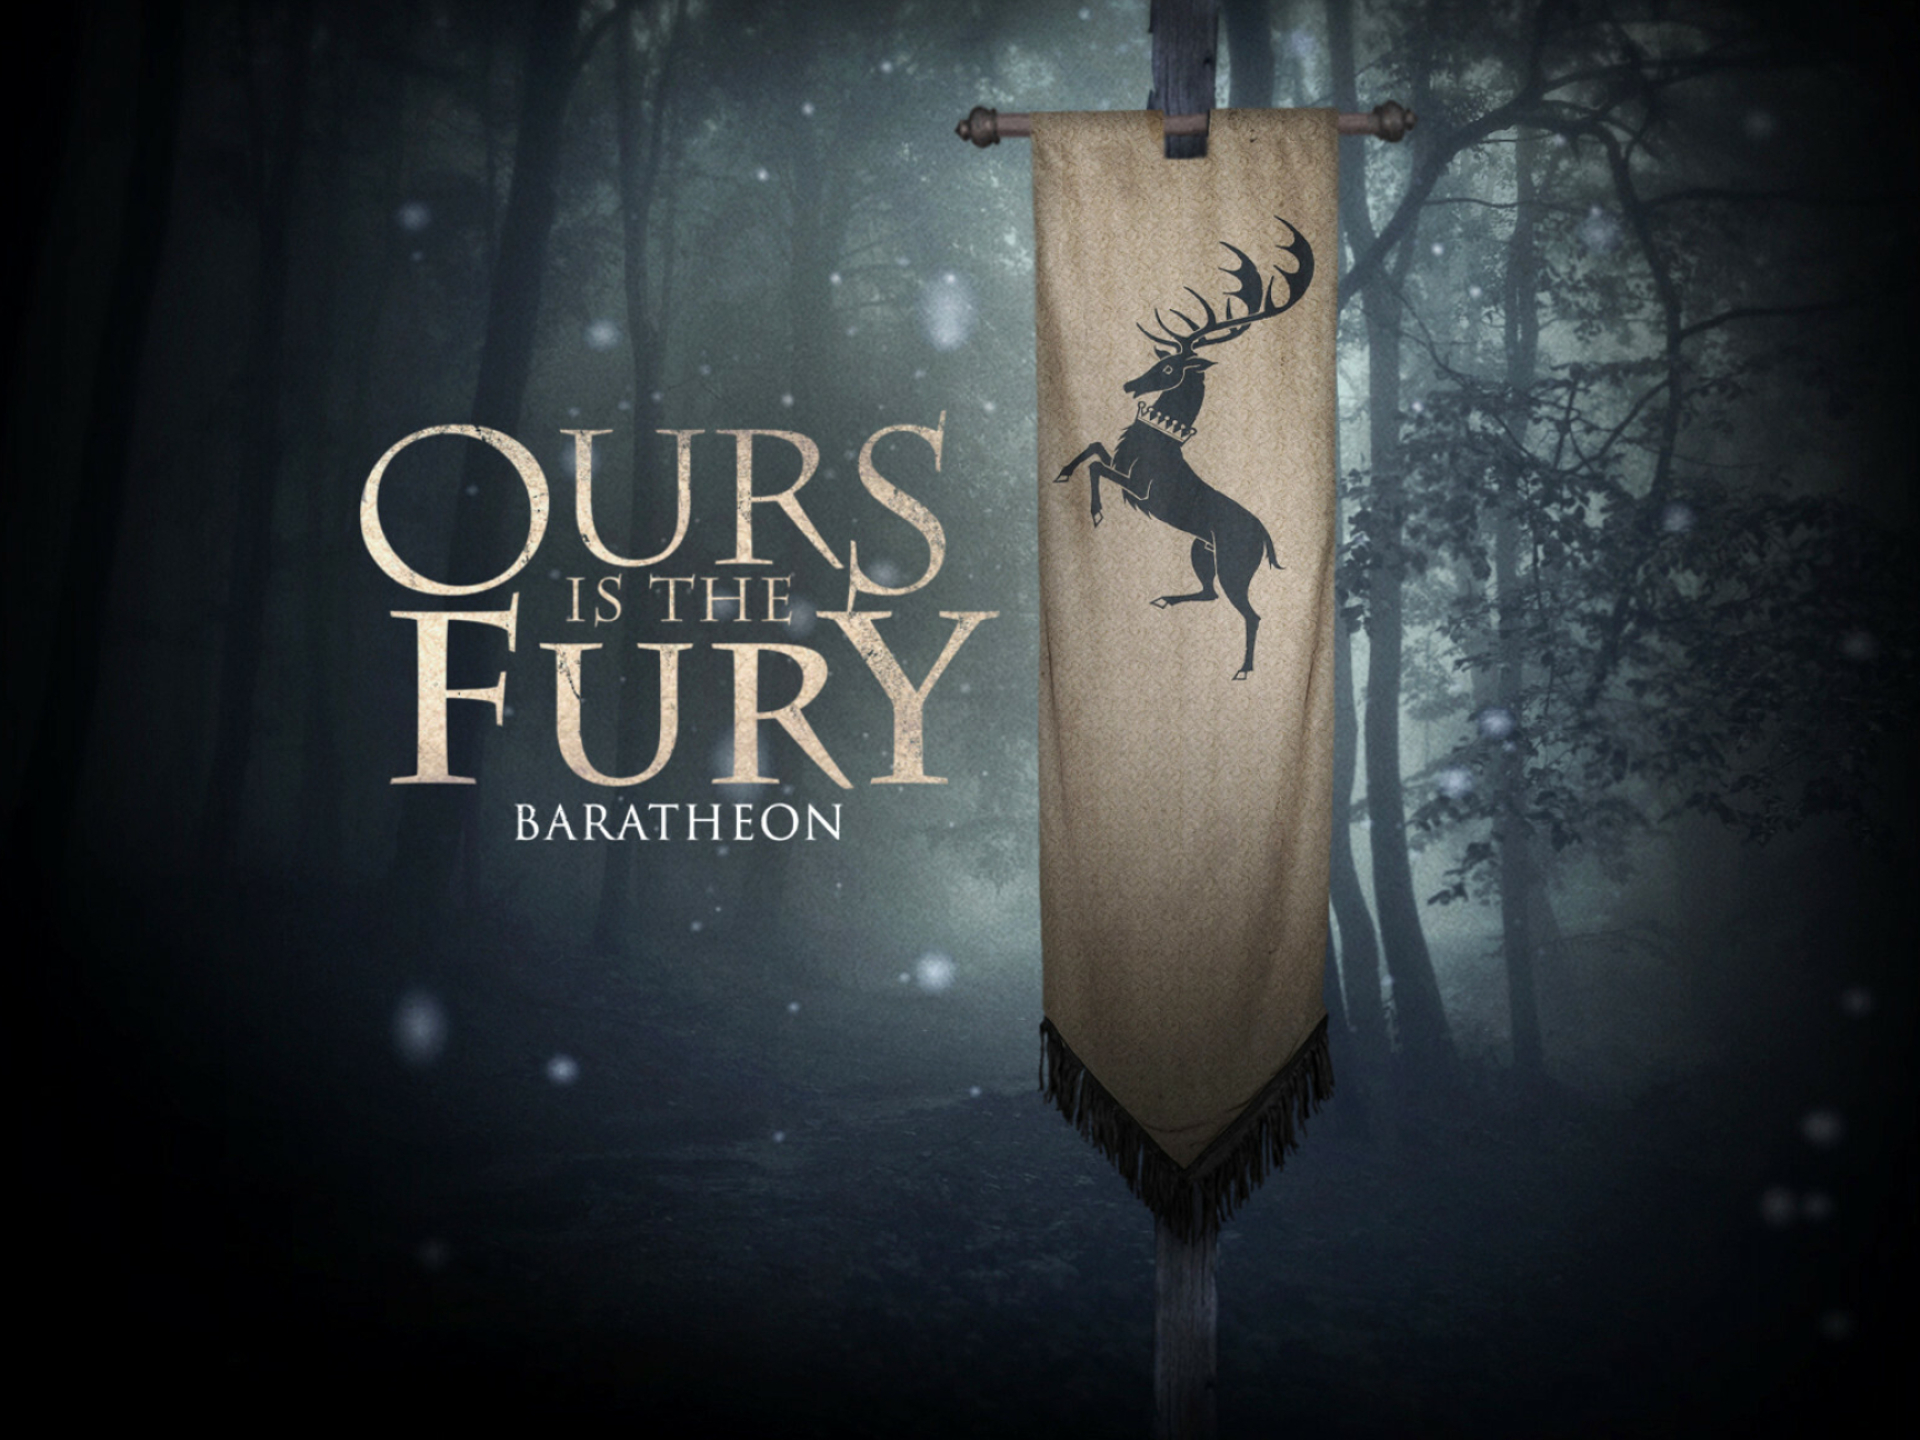 Game of Thrones: Ours is the furry, House Baratheon, HBO series. 1920x1440 HD Wallpaper.